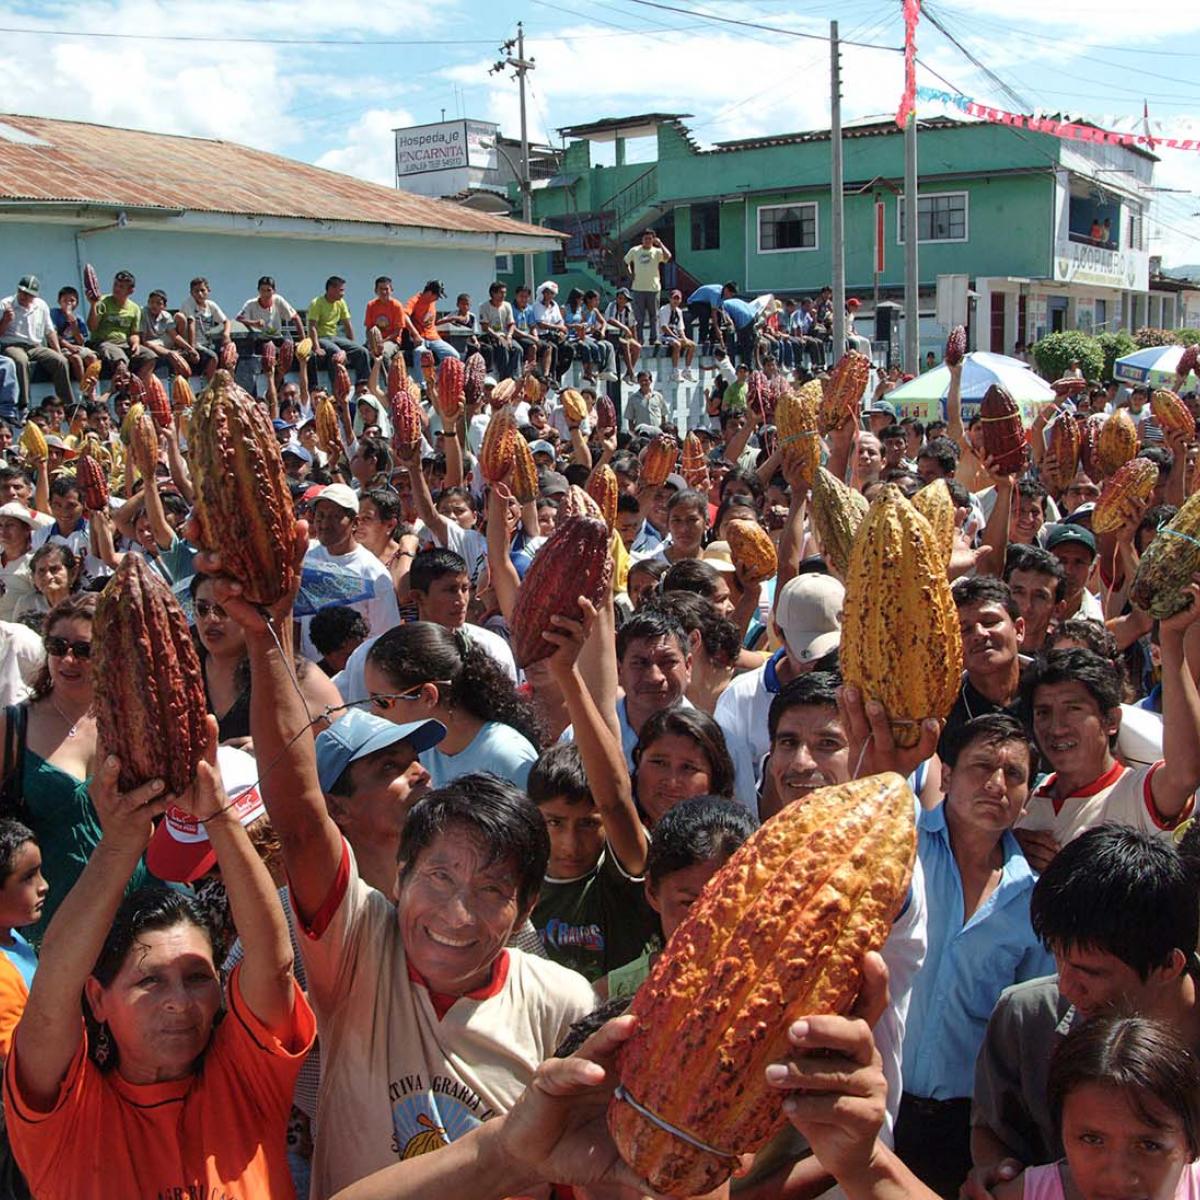 A crowd of cacao farmers in Peru raising hands and holding cacao fruits